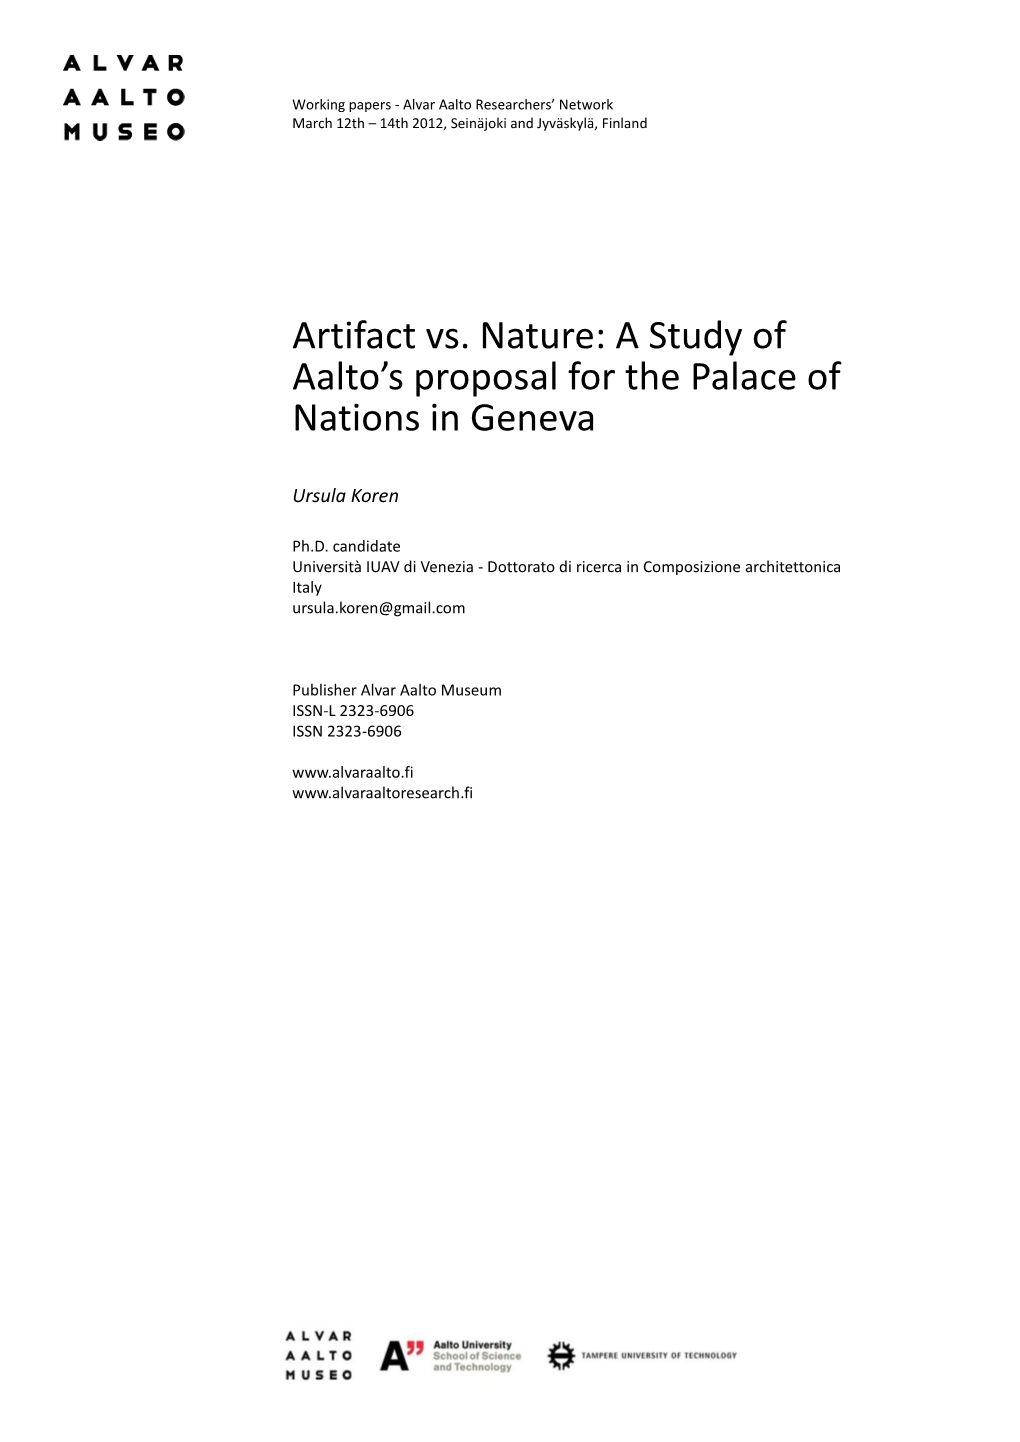 A Study of Aalto's Proposal for the Palace of Nations in Geneva